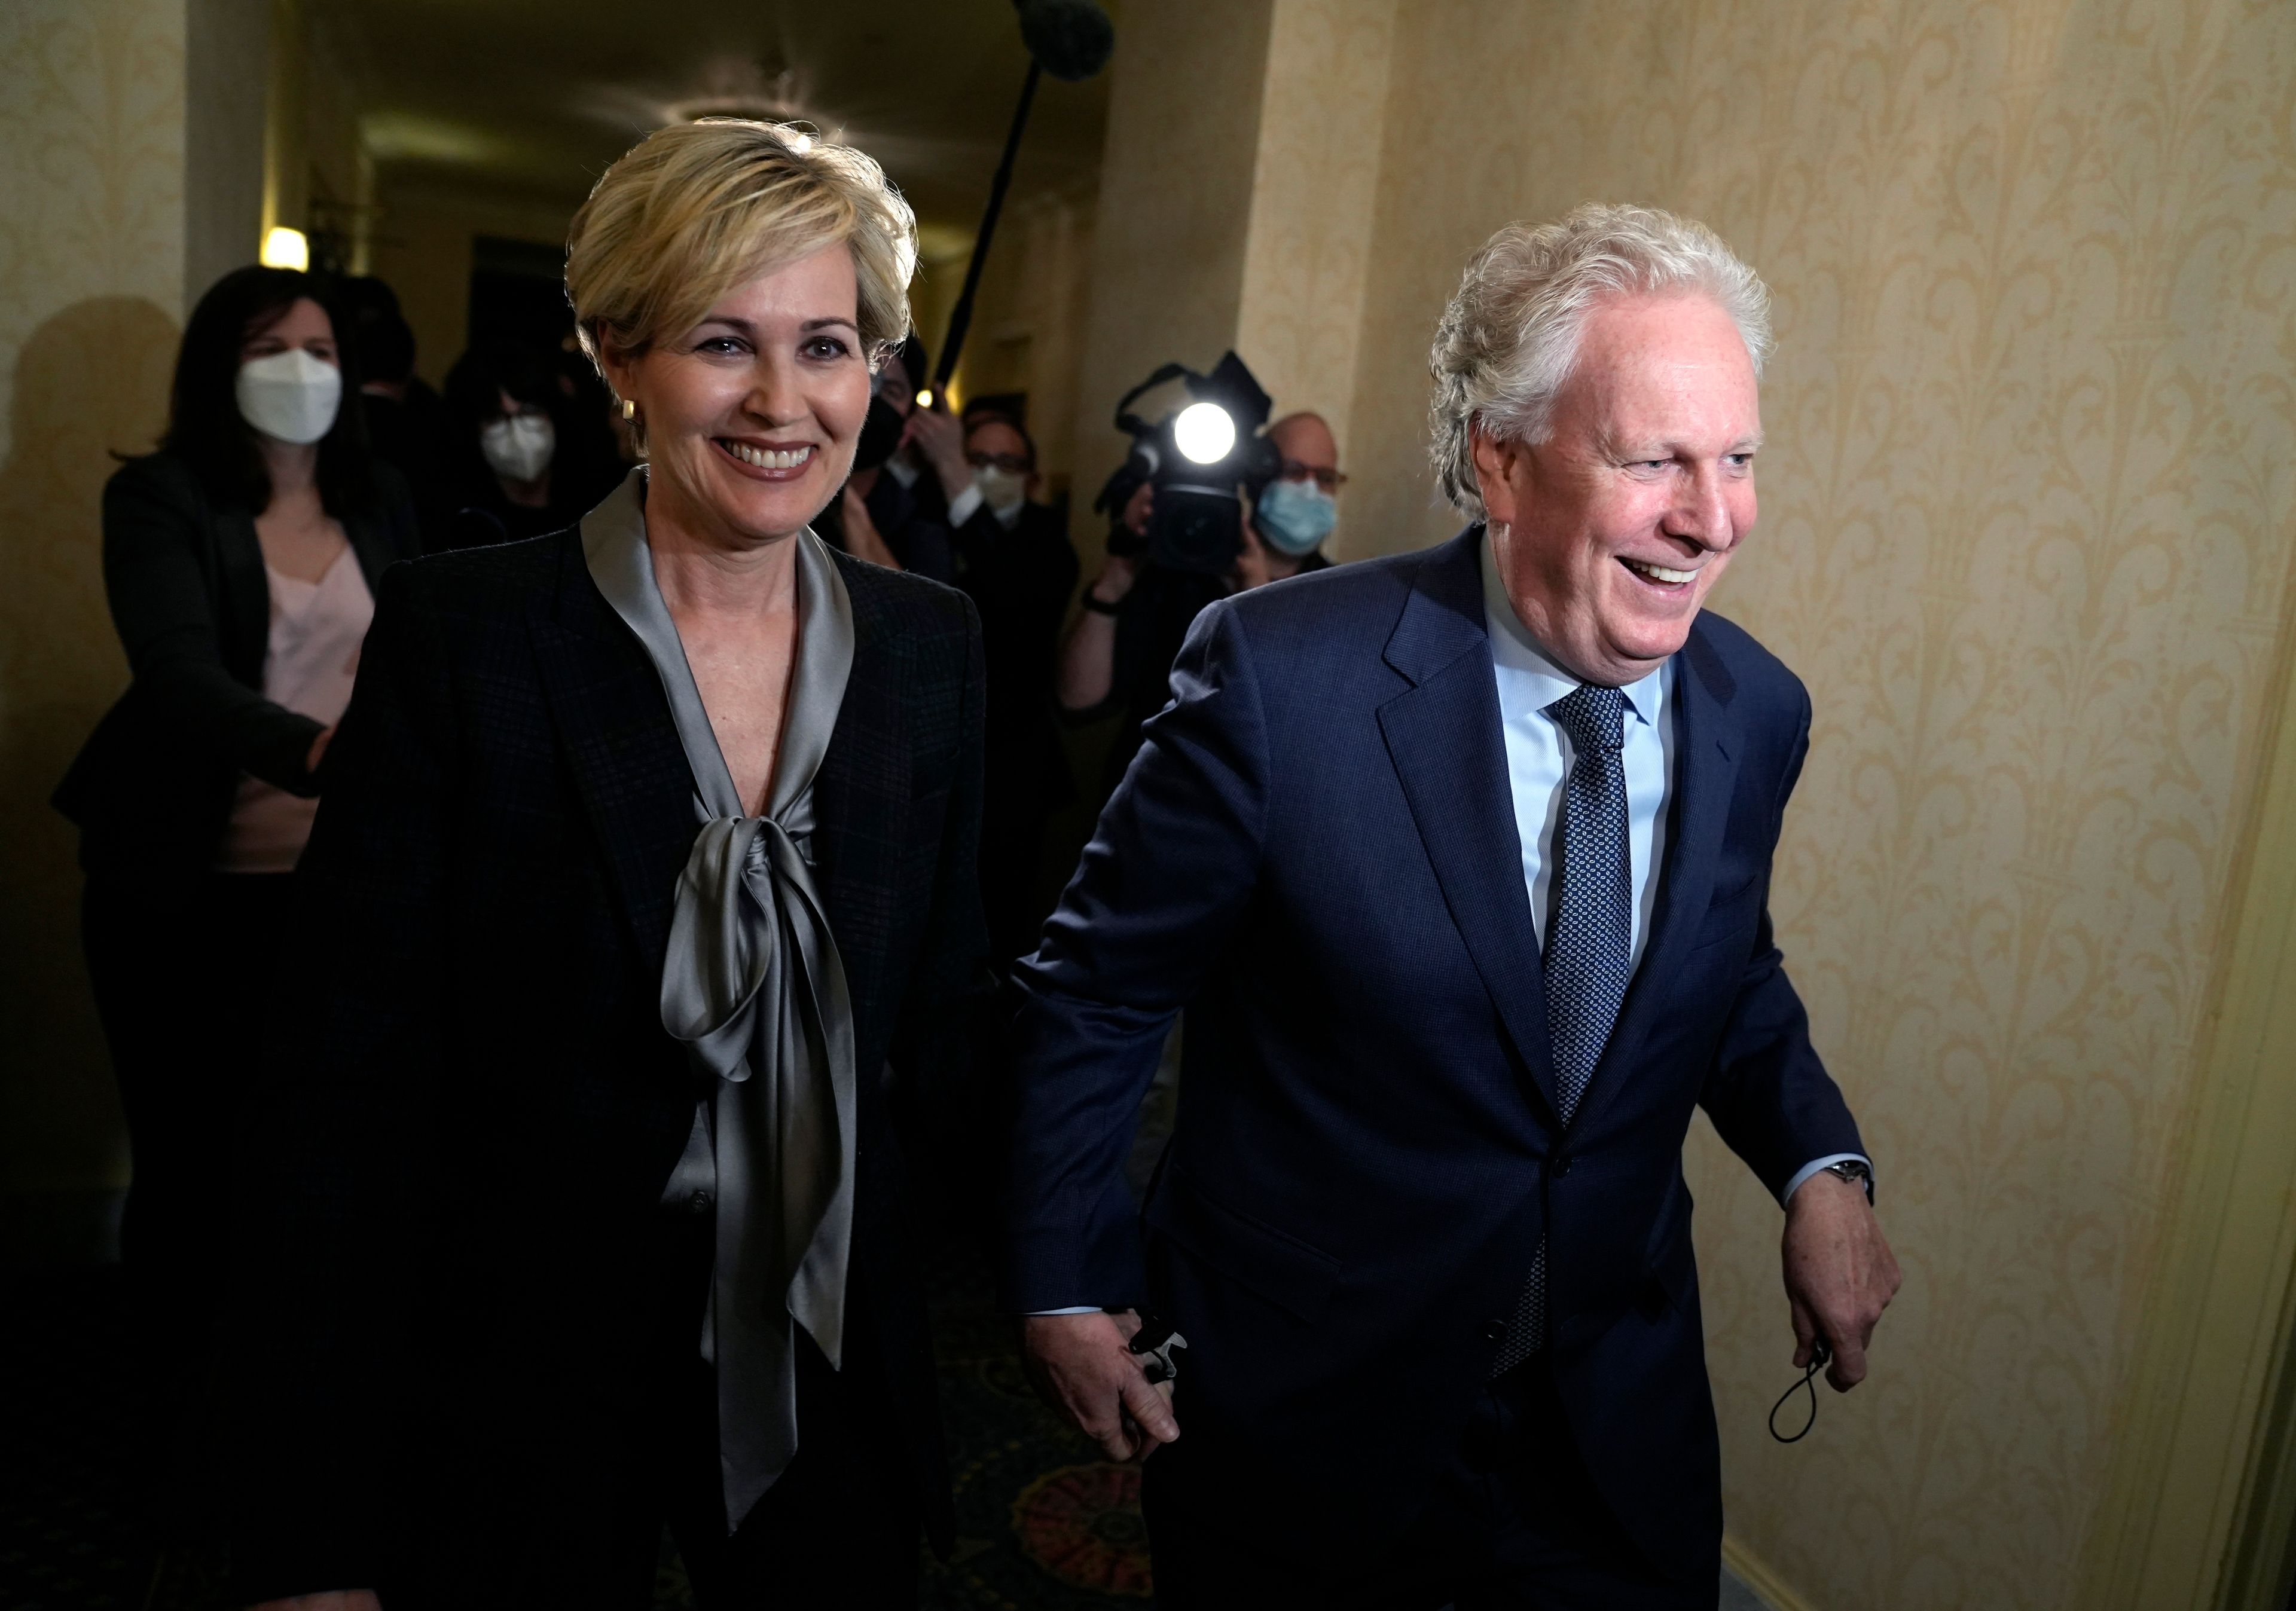 Charest arrives with his wife Michele Dionne for an event with potential caucus supporters, in Ottawa, March 2, 2022. (Justin Tang/The Canadian Press)